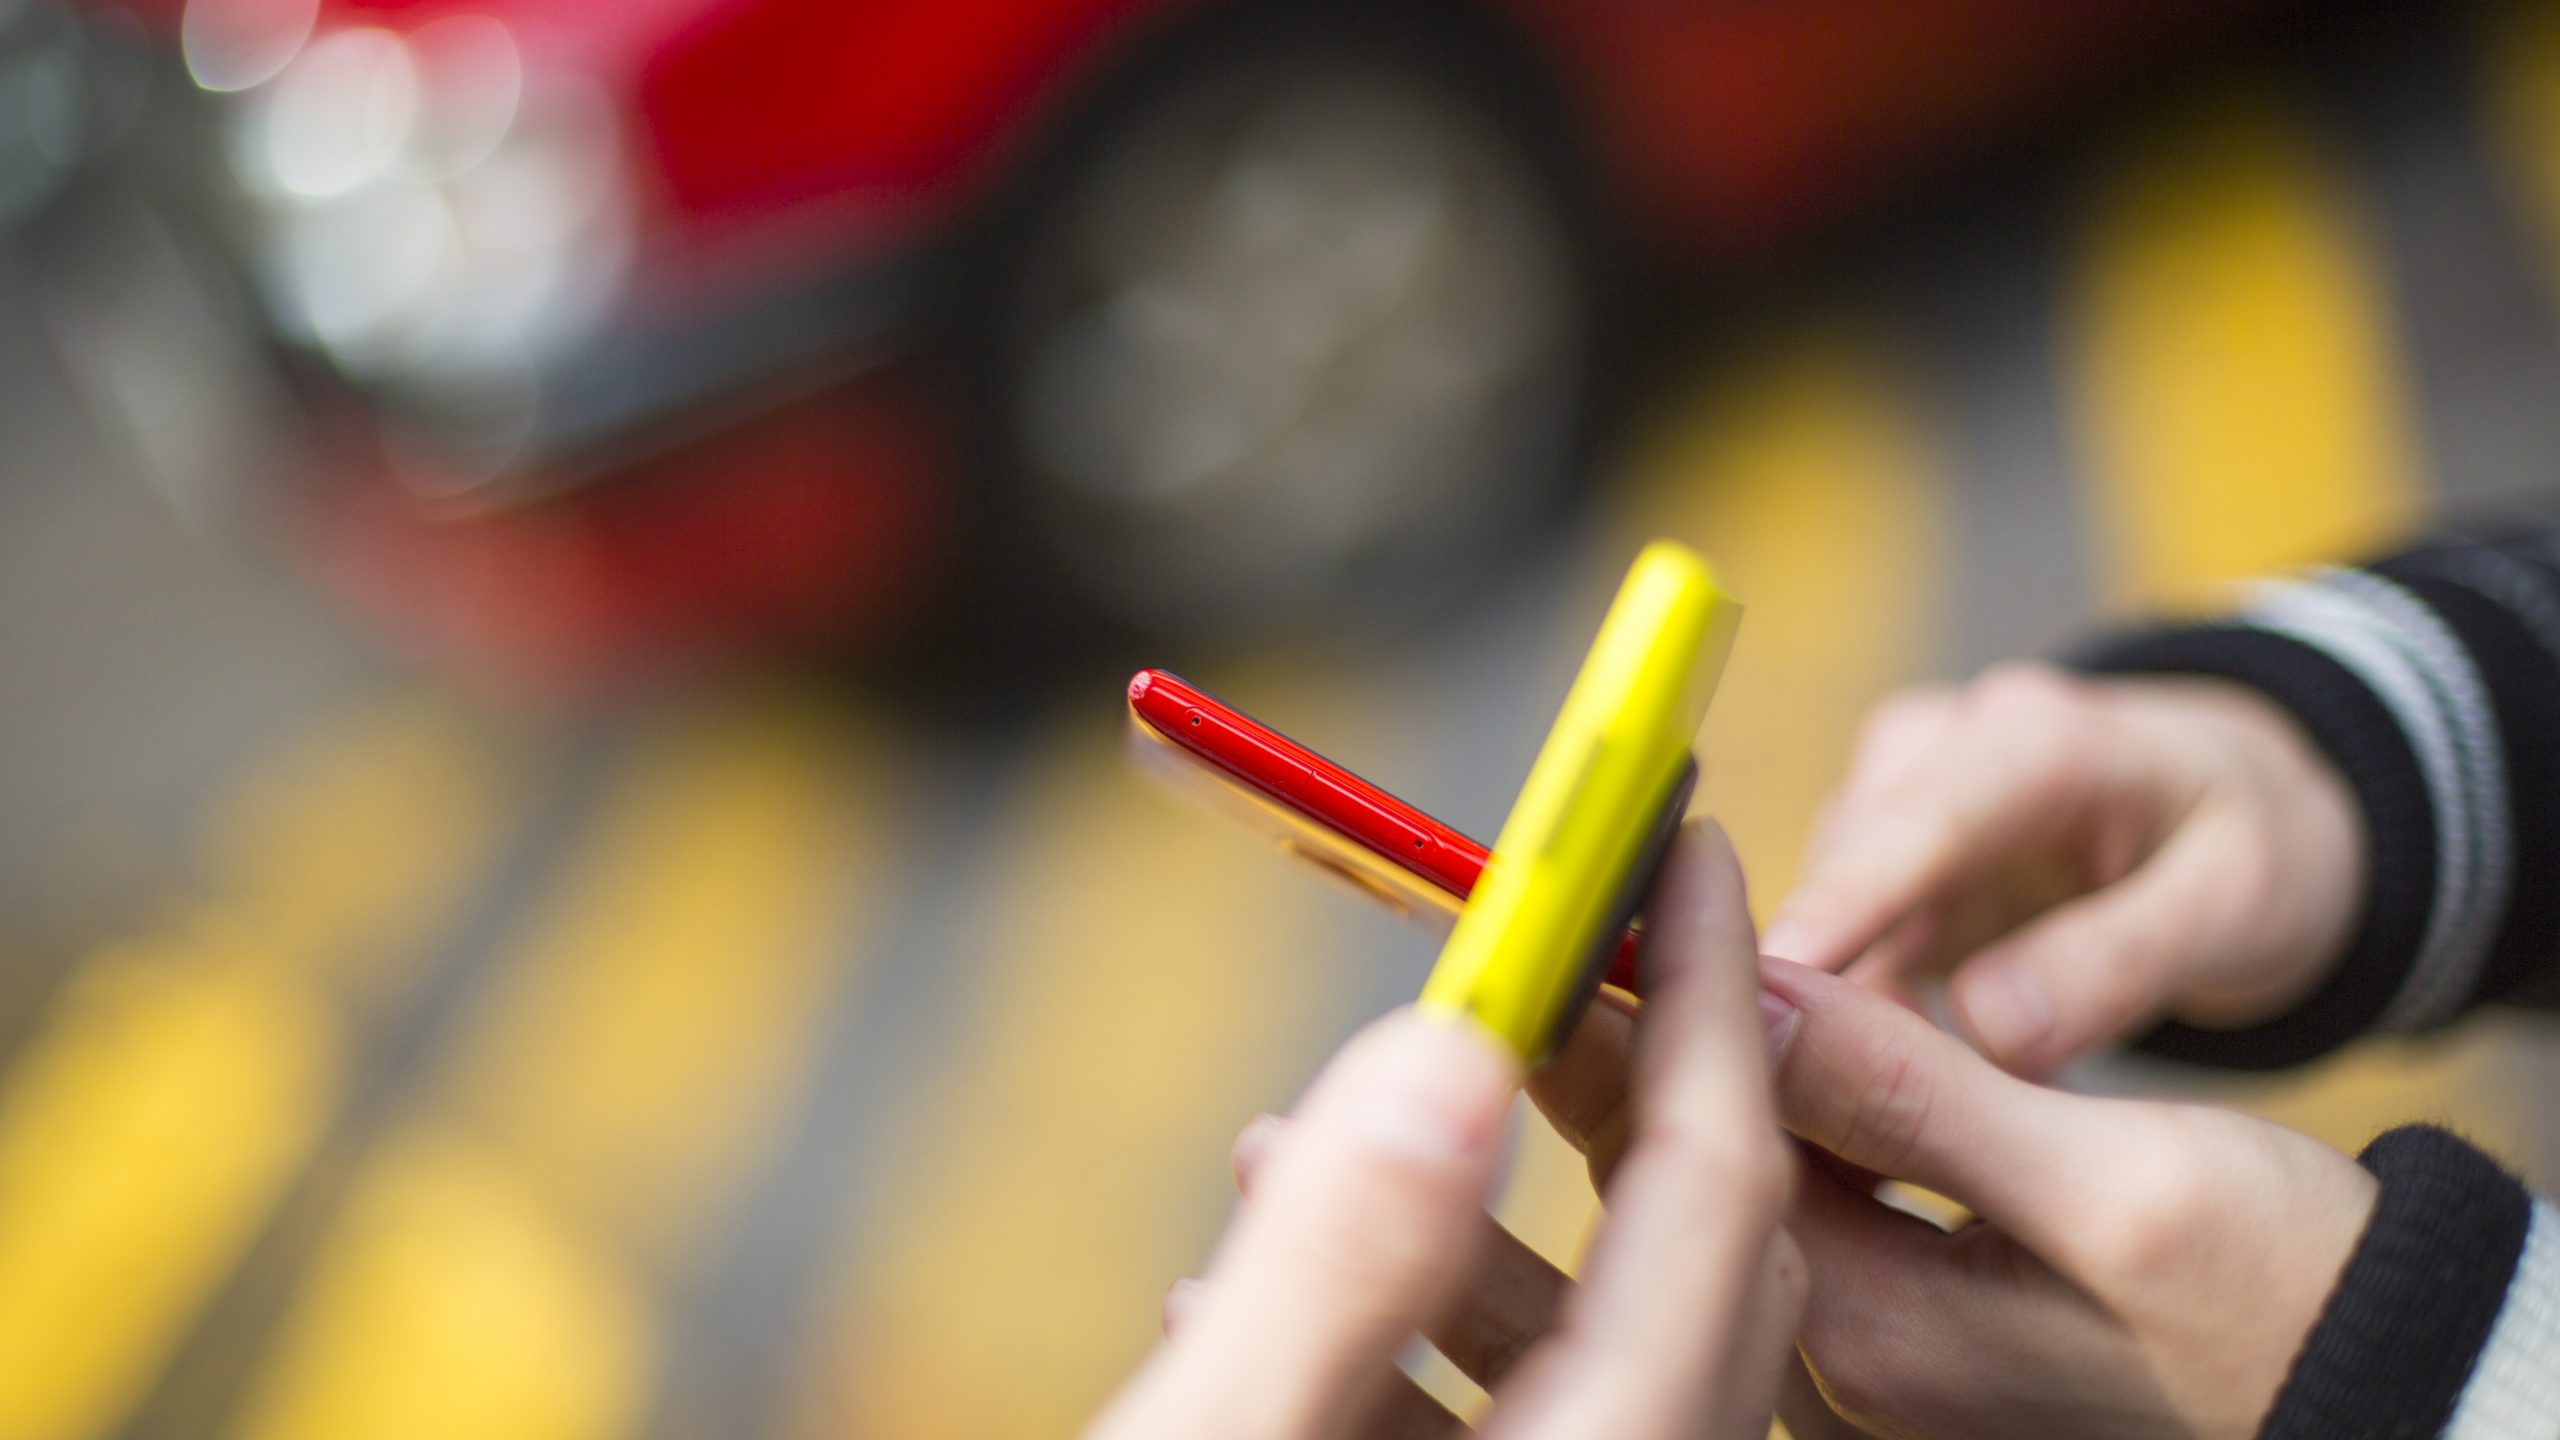 Yellow and red smartphones with blurred yellow and red background on the street. Photographer Tuomas Harjumaaskola.